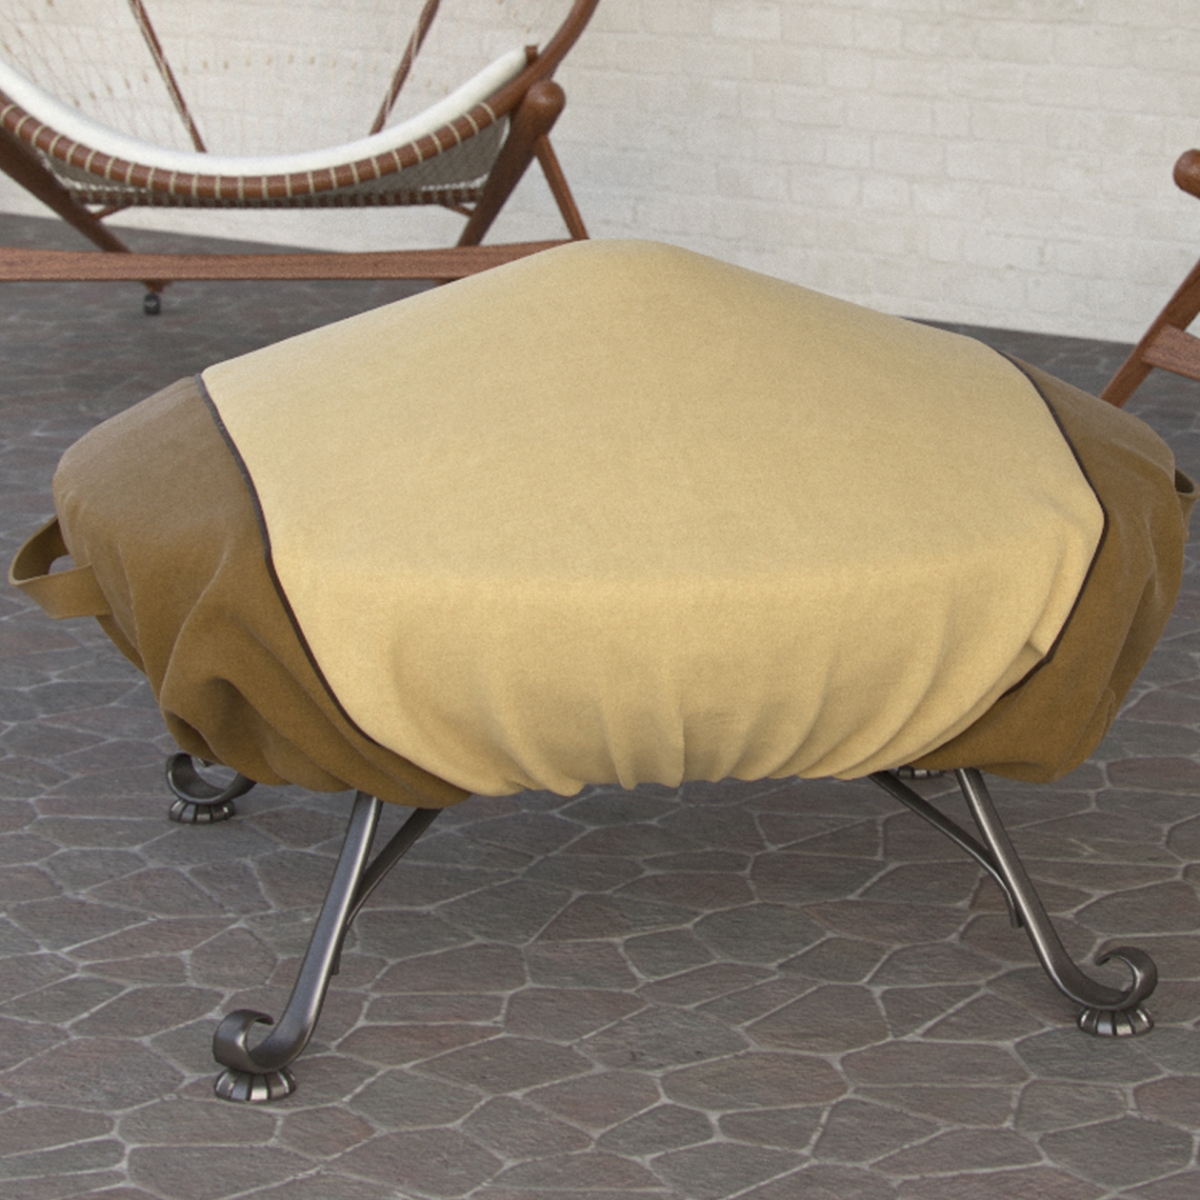 Lrfp5505 Fade Proof Two Tone 60 In. Heavy Duty Durable & Water Resistant Round Fire Pit Cover, Large